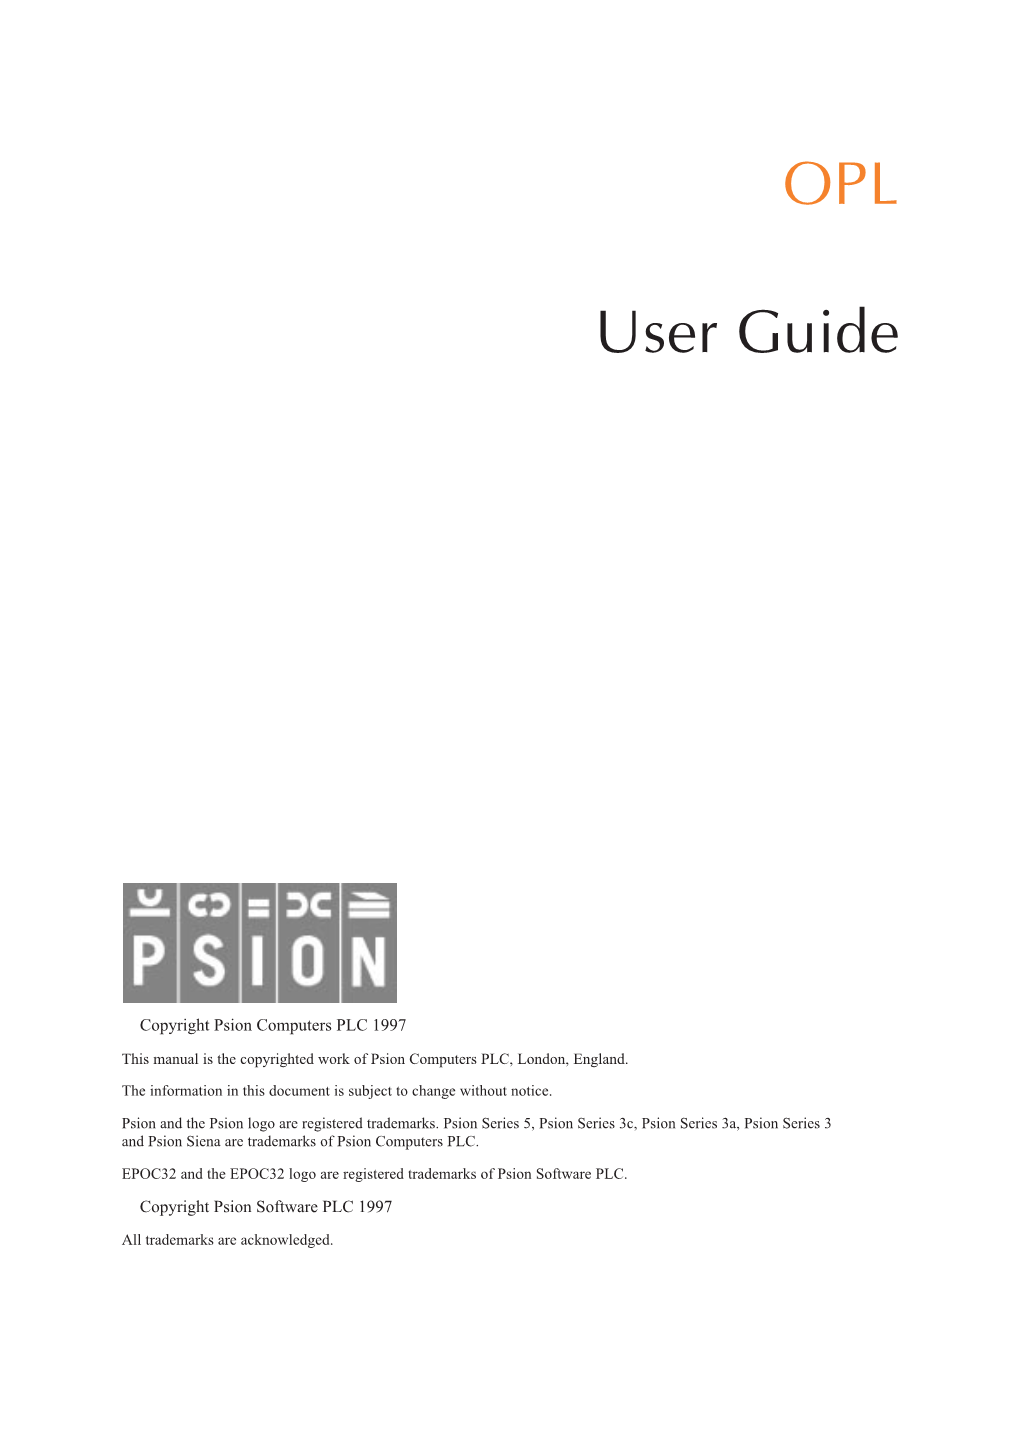 OPL User Guide for Psion Series 5, Series 3C and Siena Machines